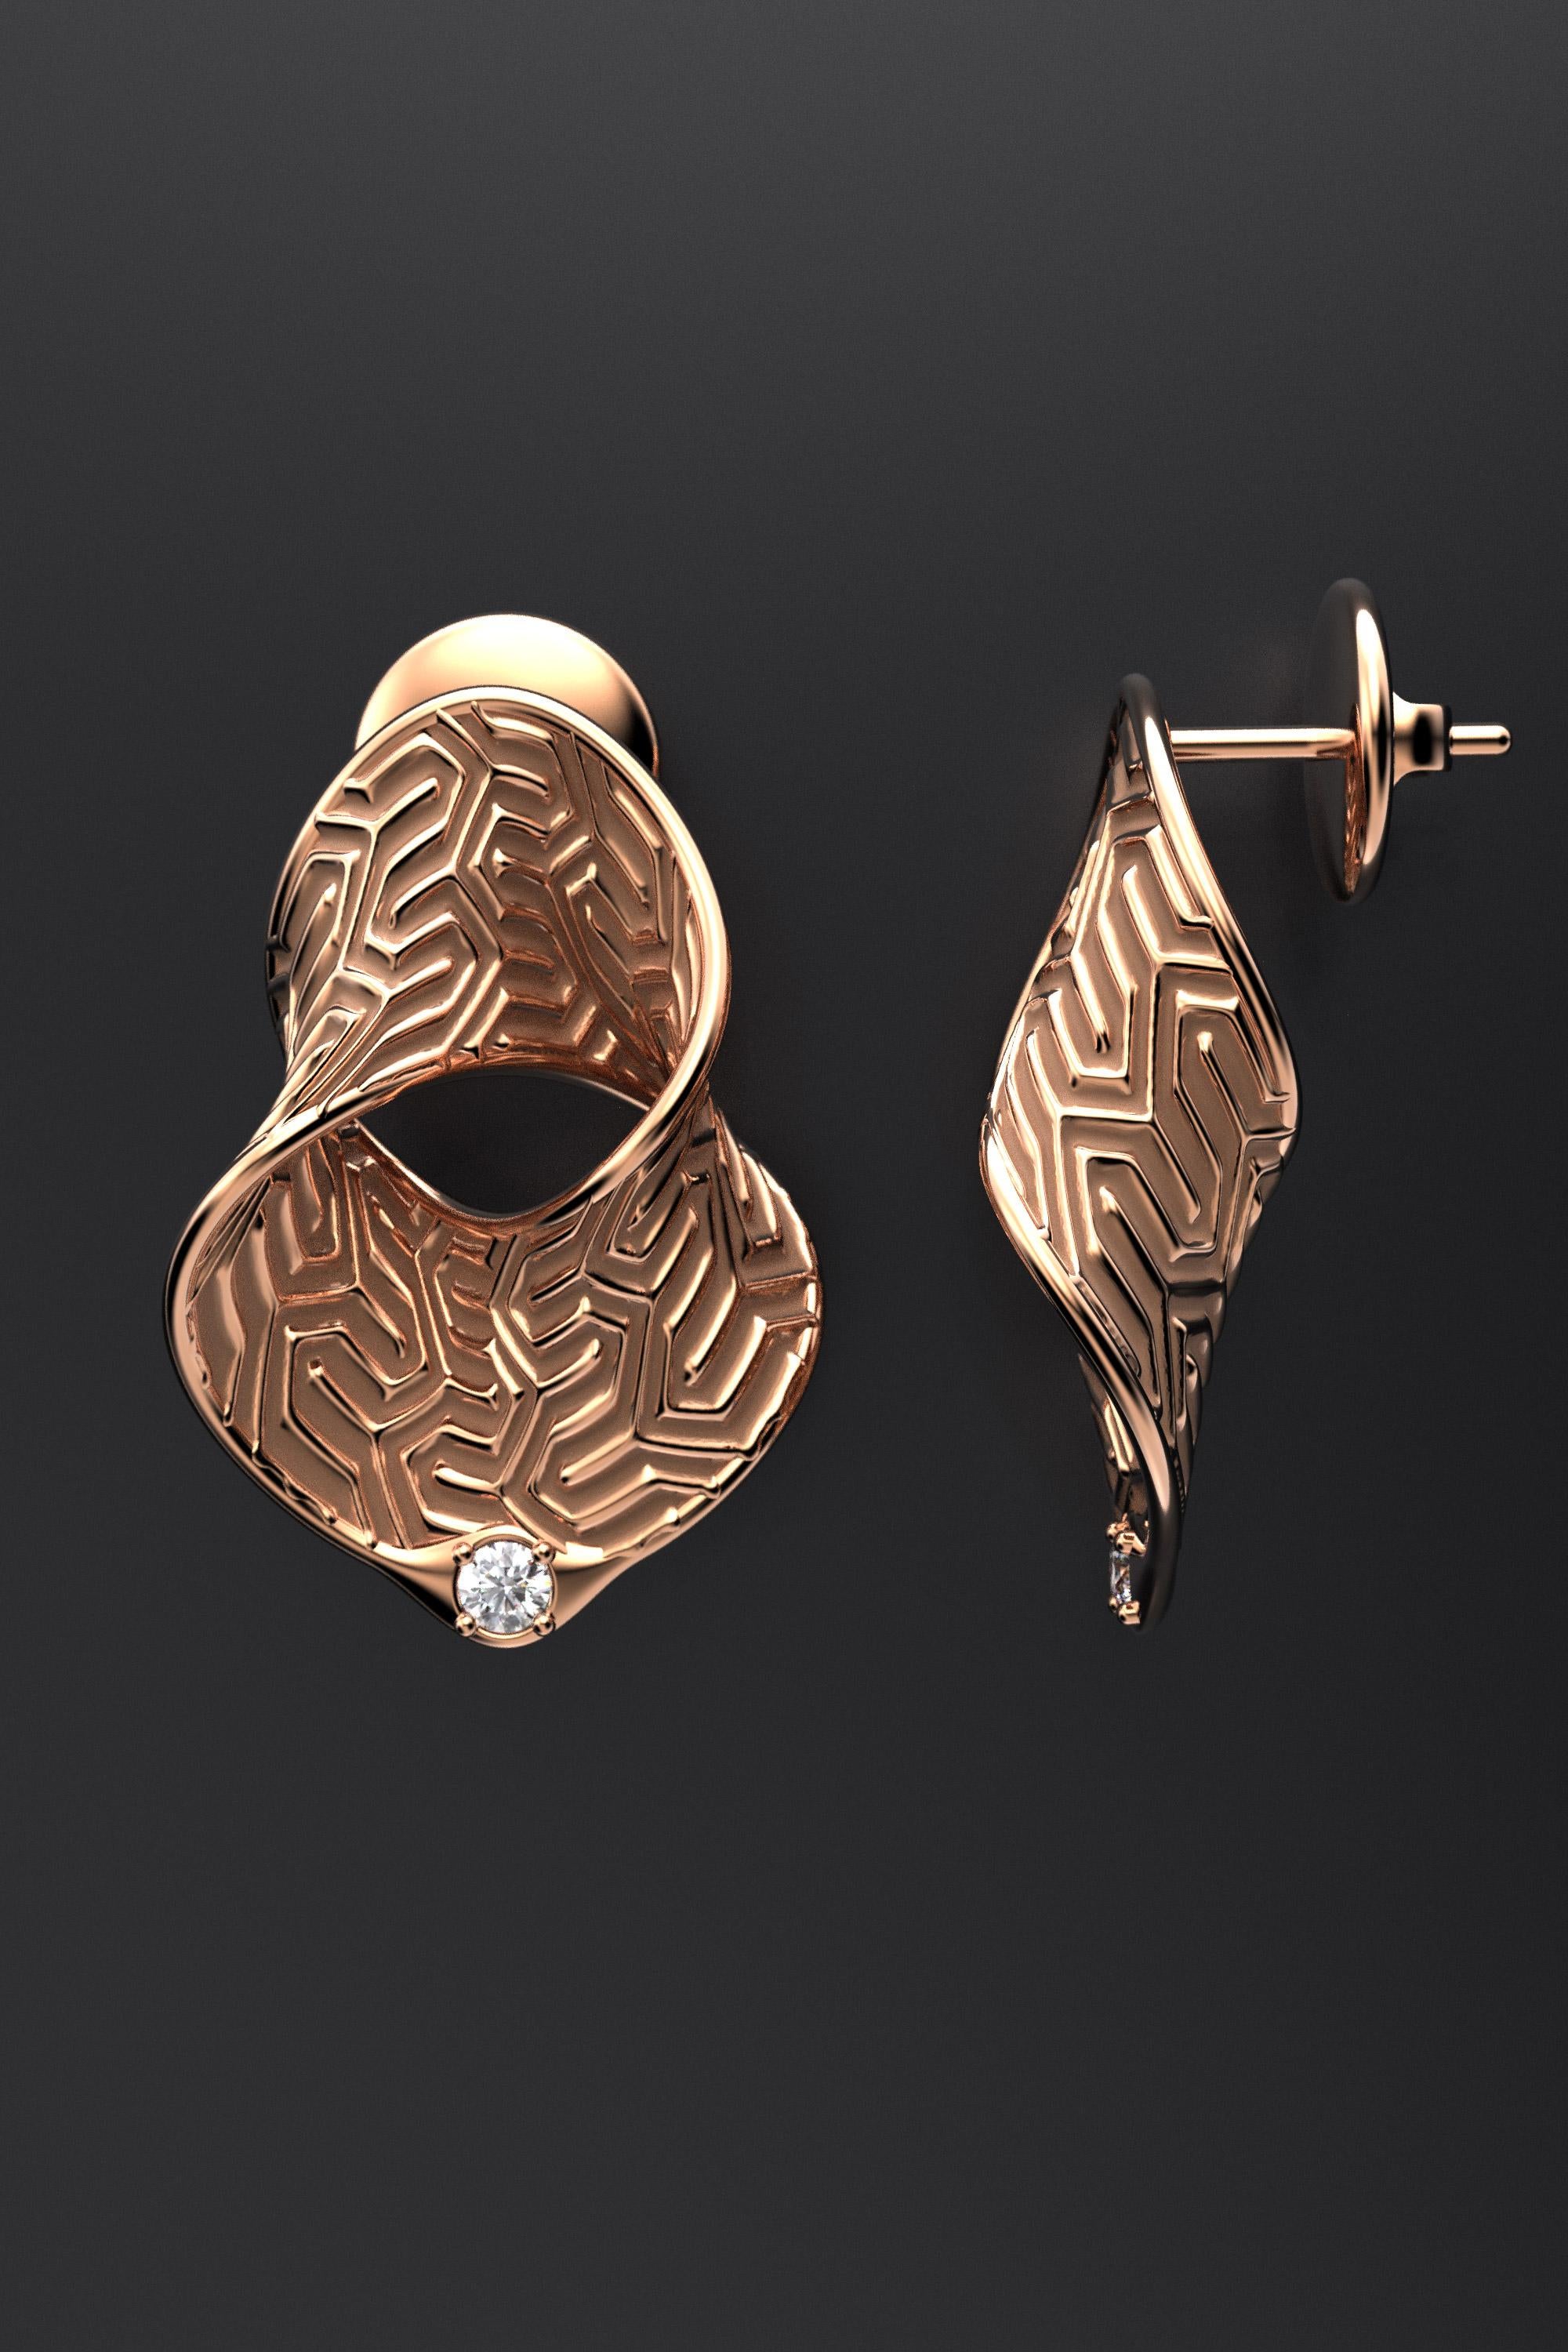 Women's 18k Gold Diamond Earrings Made in Italy by Oltremare Gioielli, Italian Jewelry For Sale